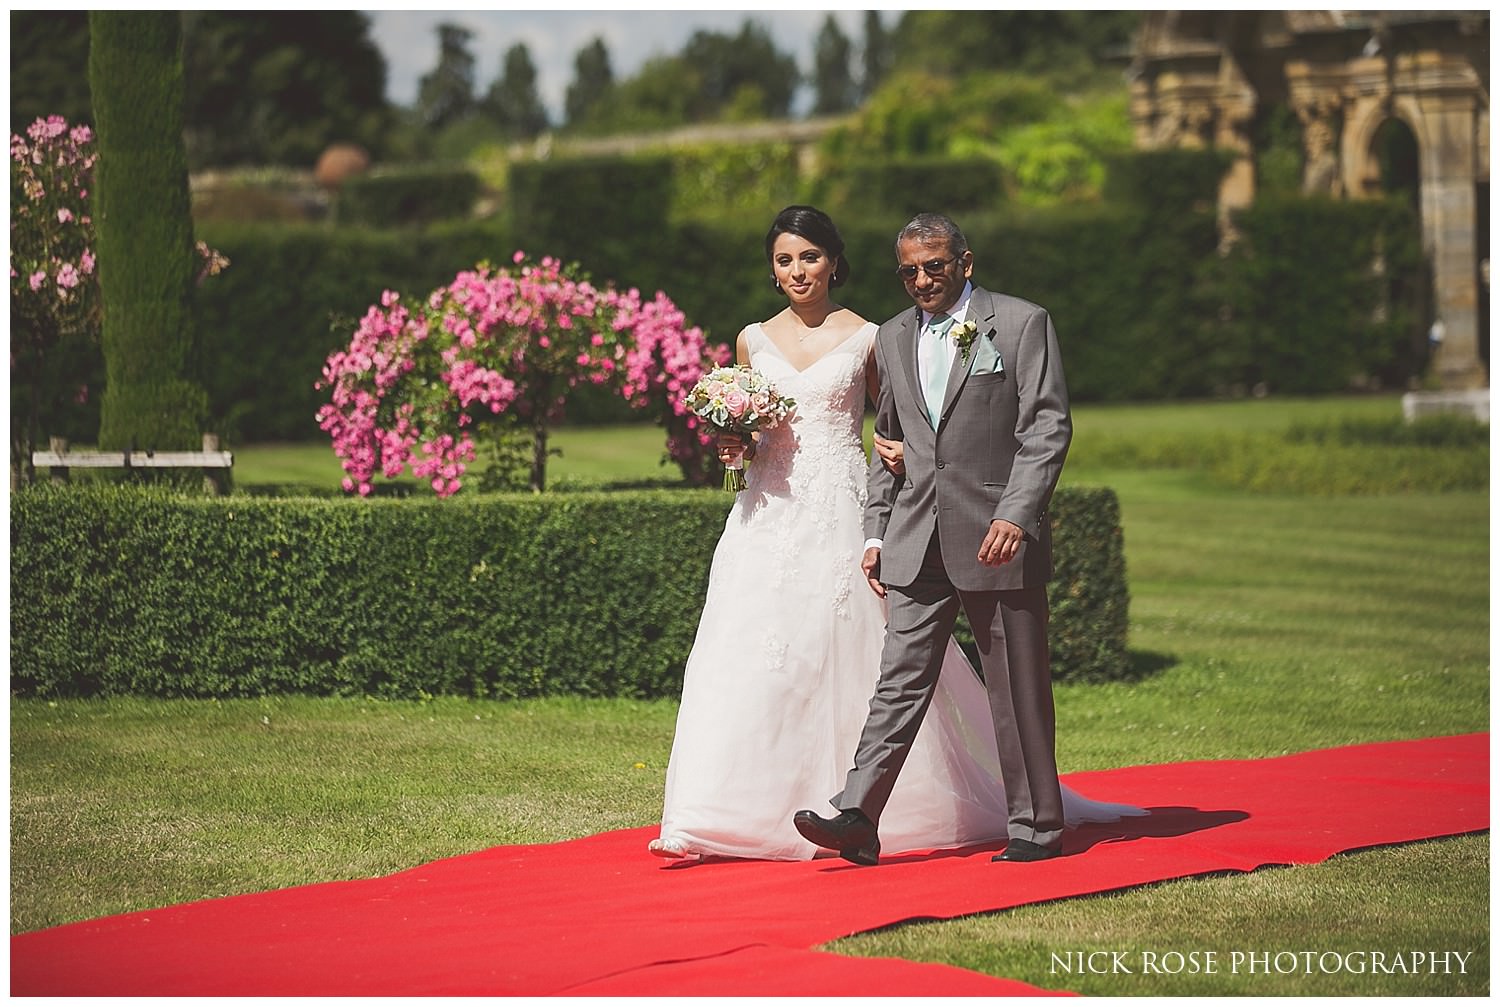  Father of the bride walking daughter up the red carpet aisle at hever castle  